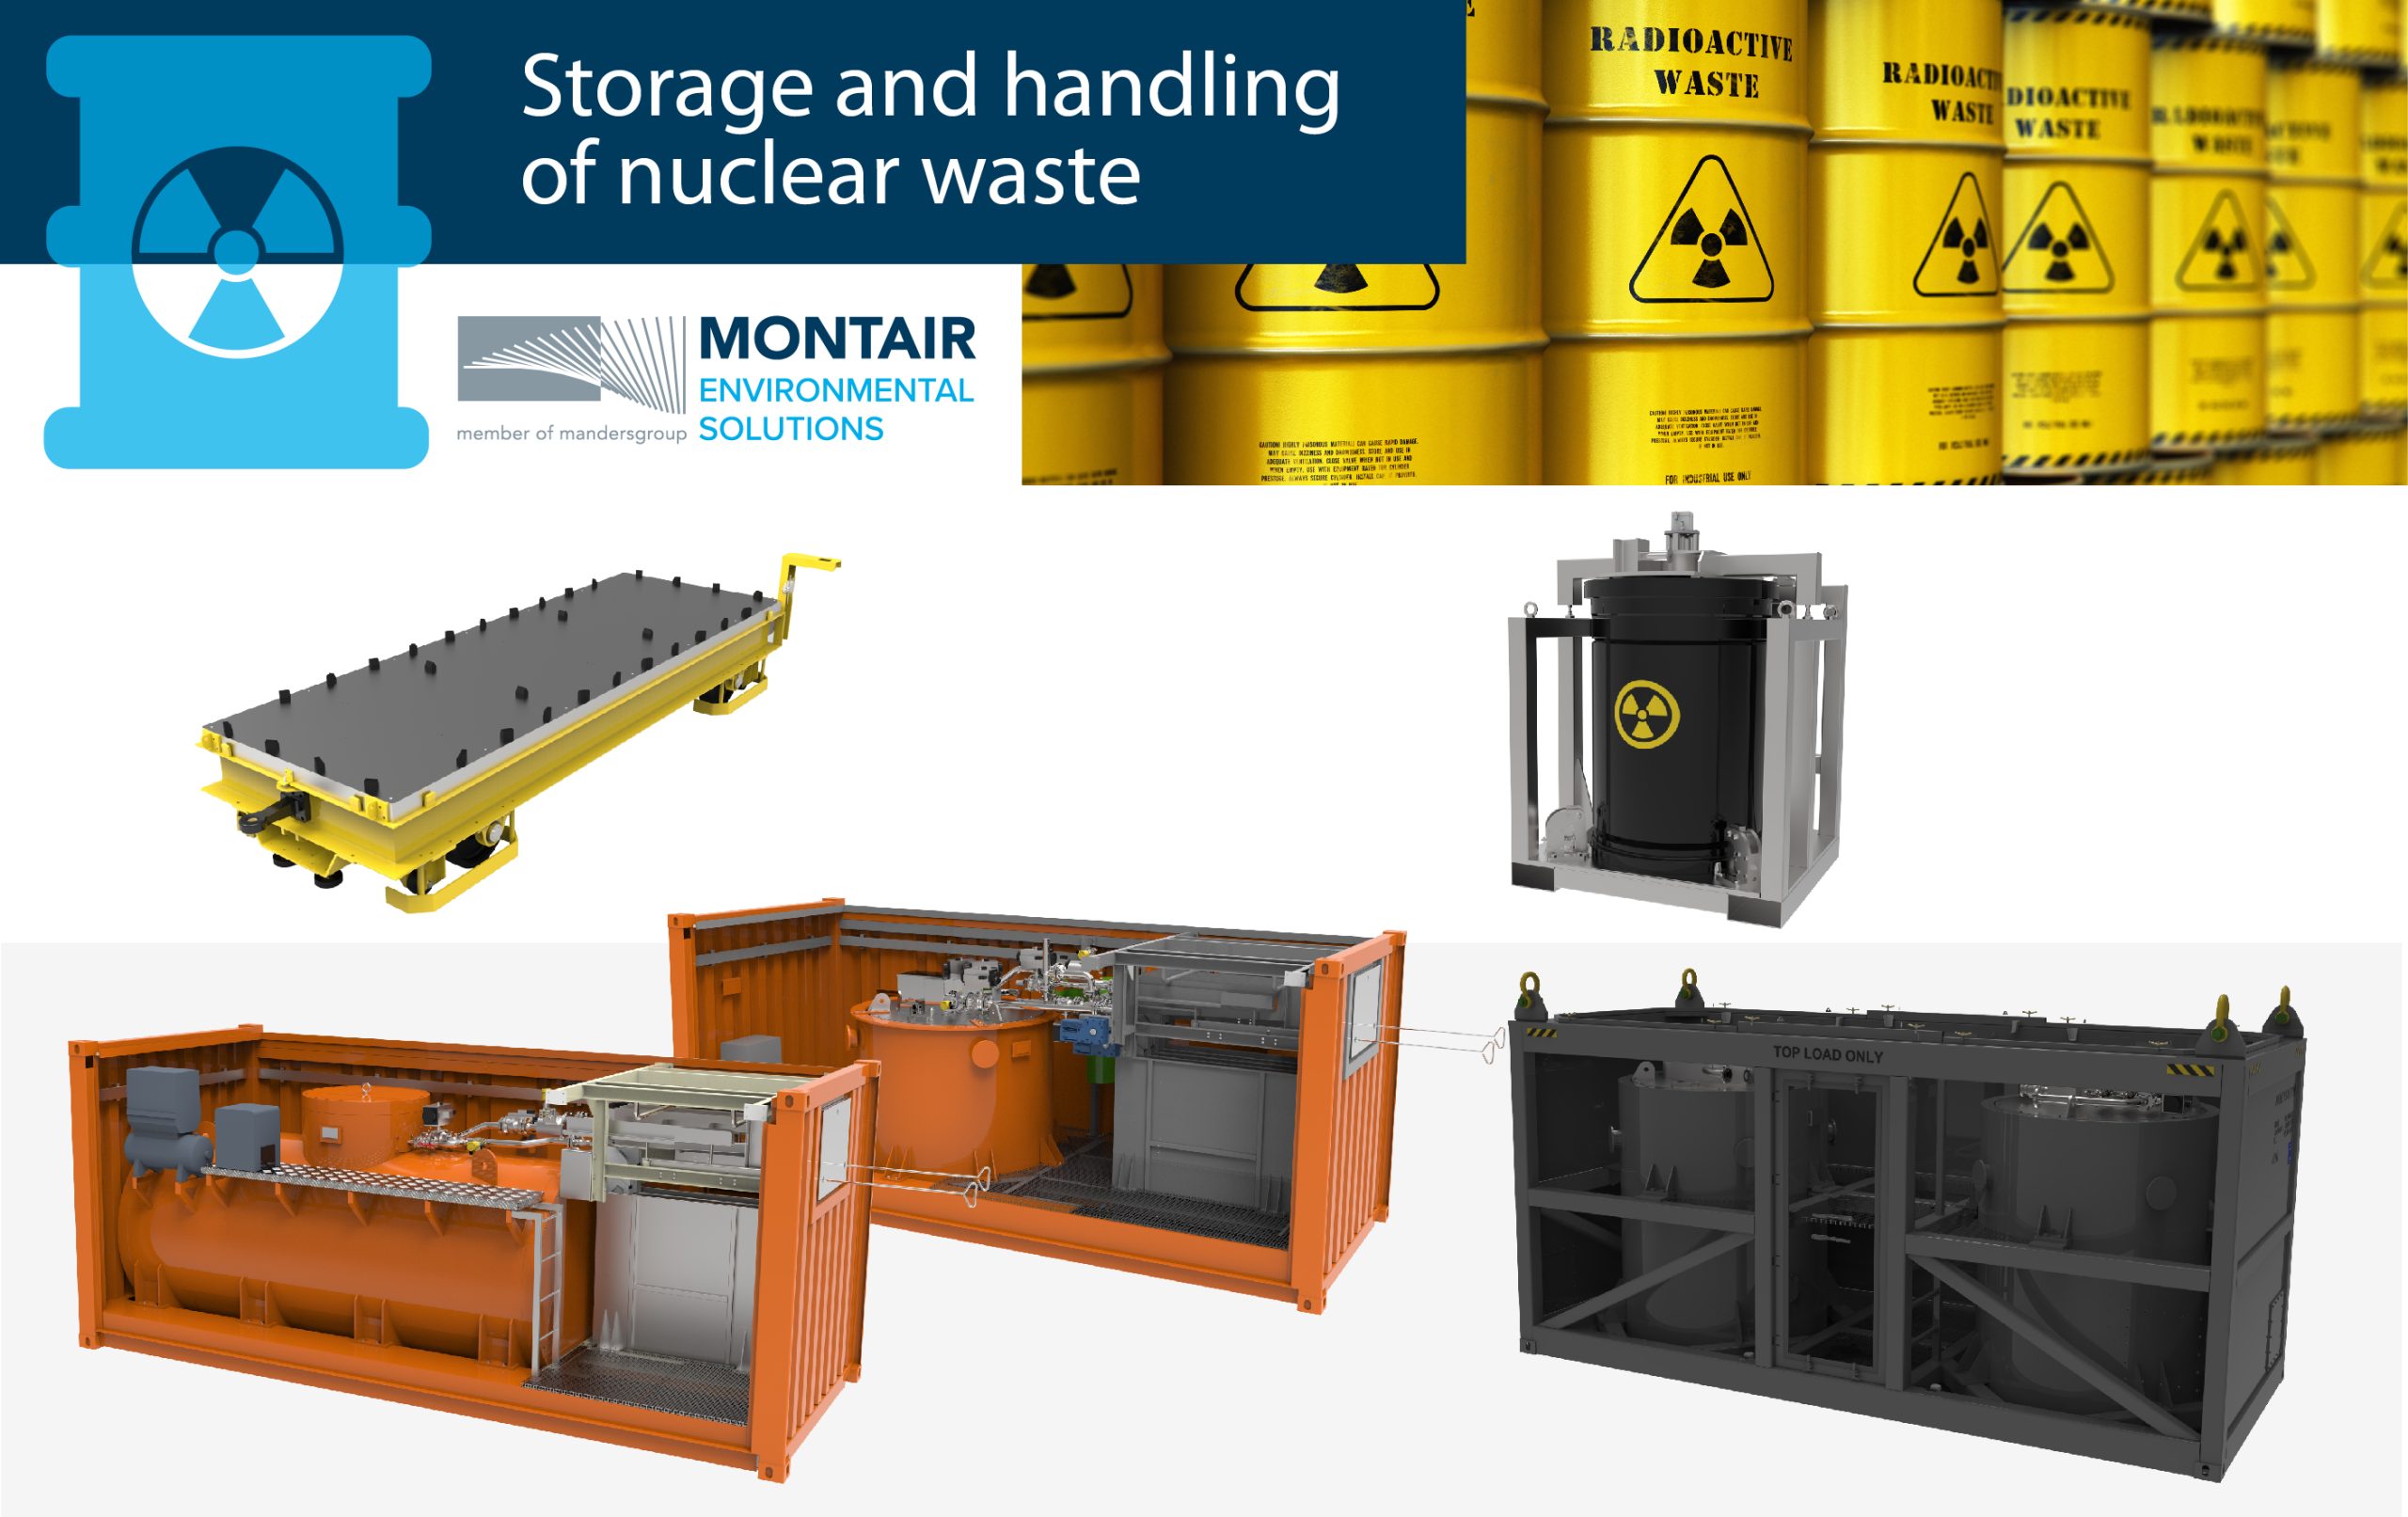 Montair Environmental Solutions - Storage and handling of nuclear waste